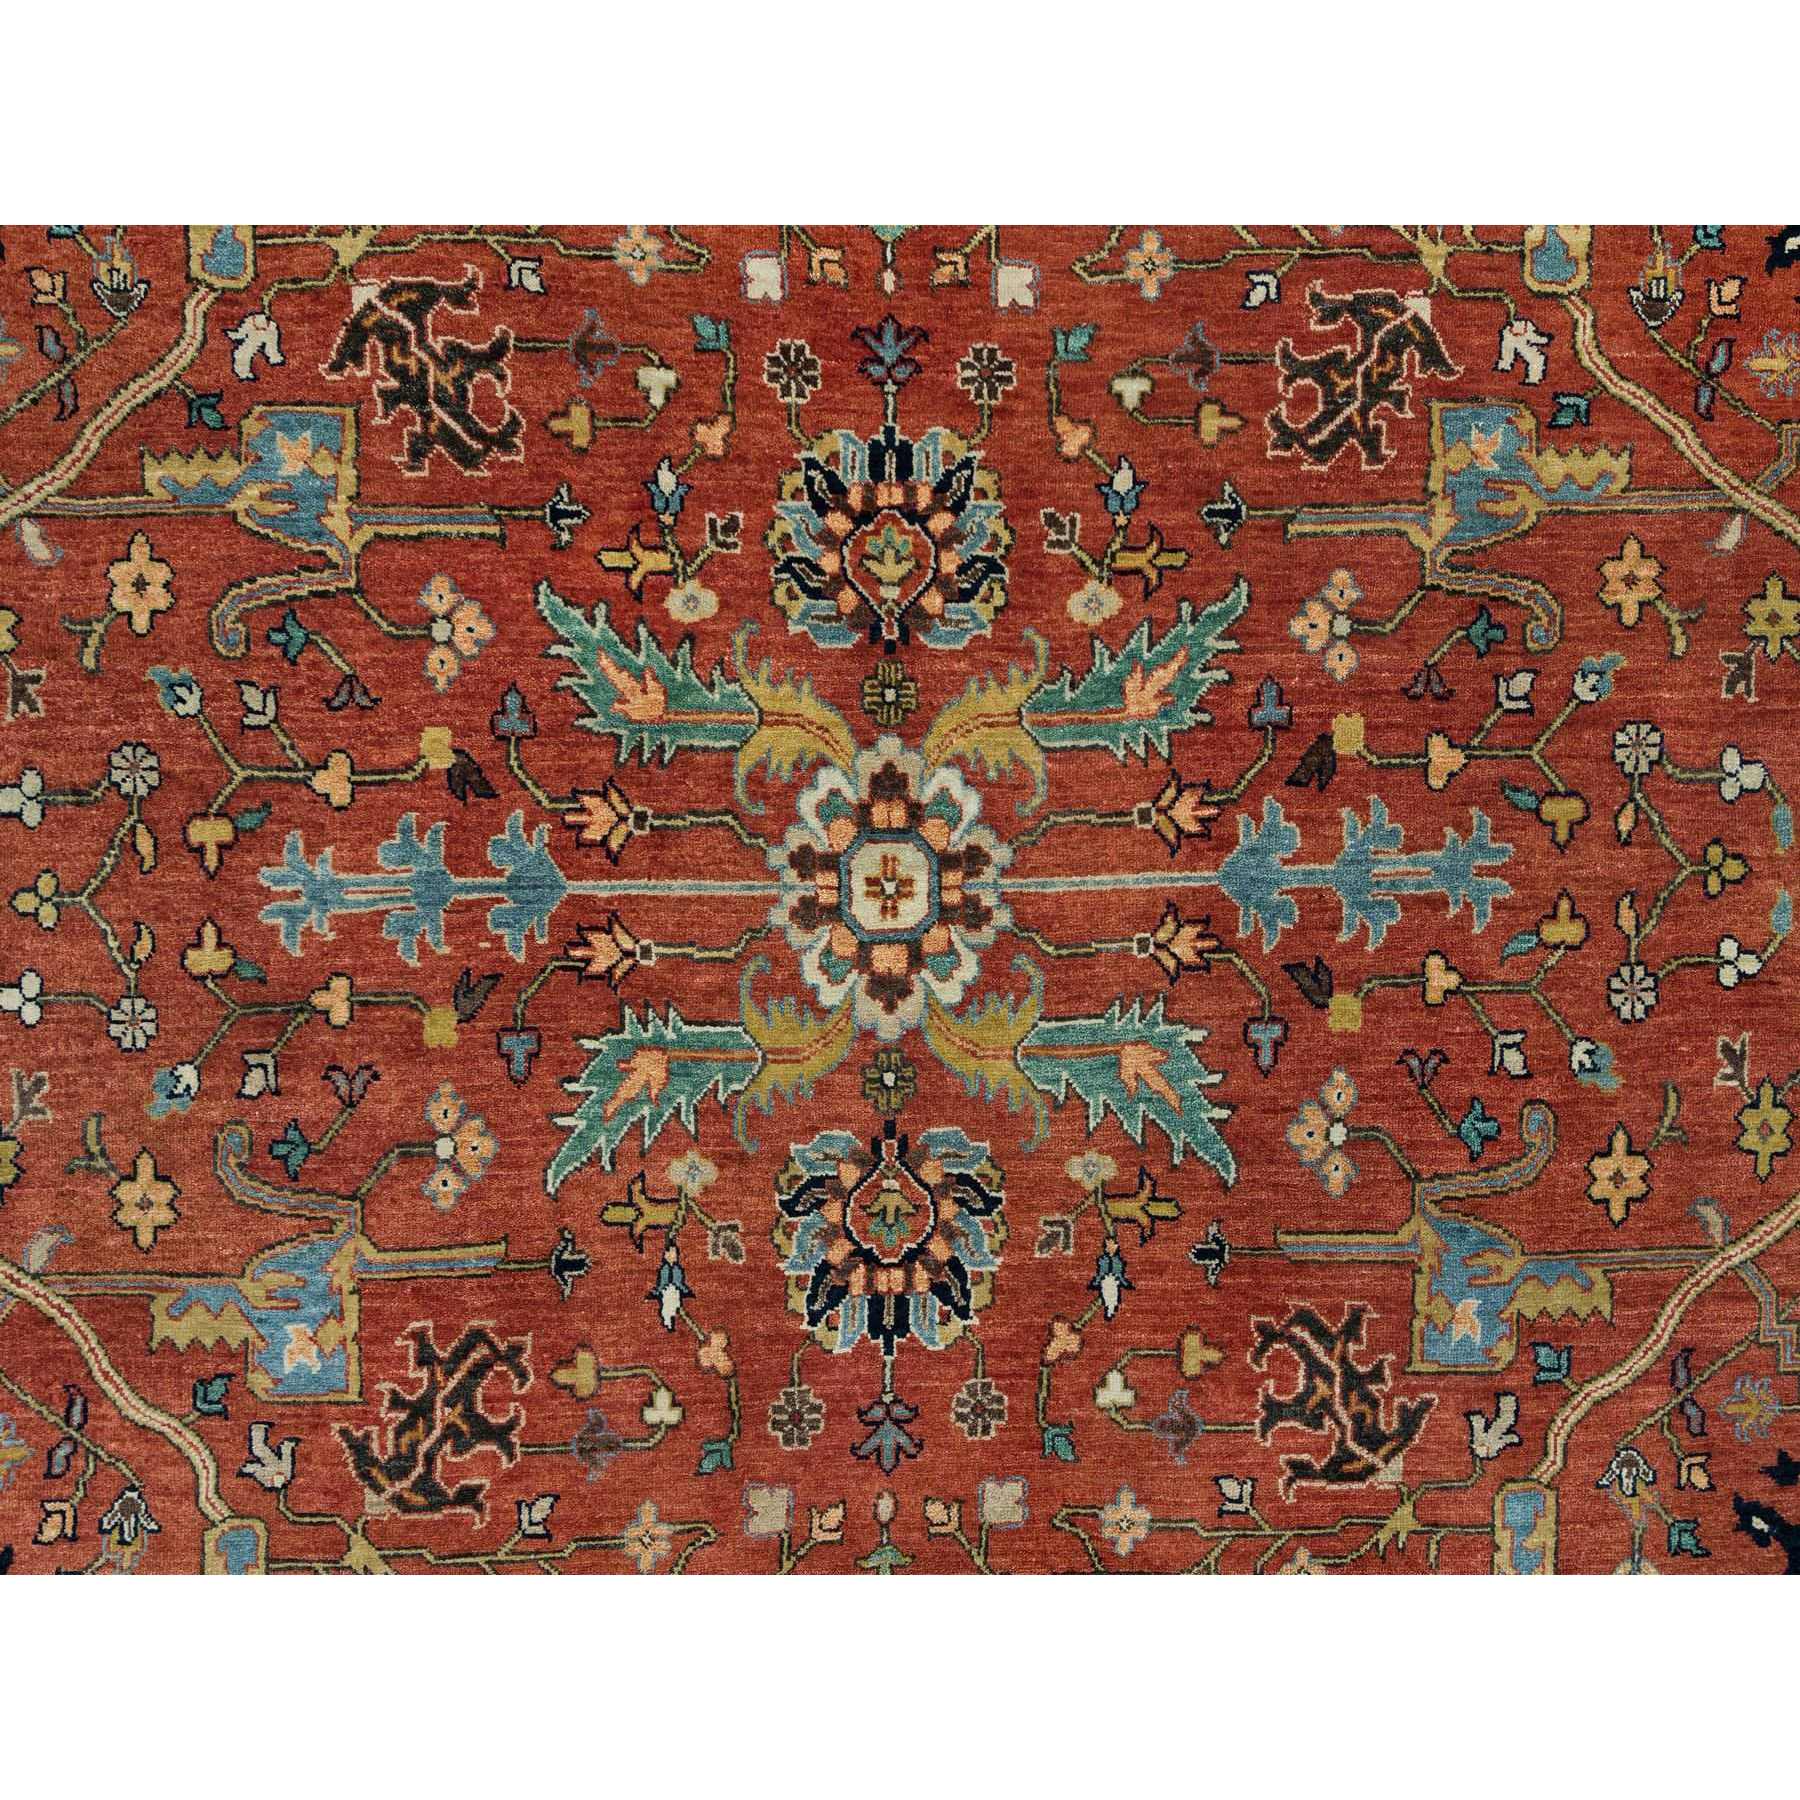 7'8"x10'3" Rust Red, Dense Weave, Antiqued Fine Heriz Re-Creation, Hand Woven, Soft and Plush, Pure Wool, Oriental Rug 